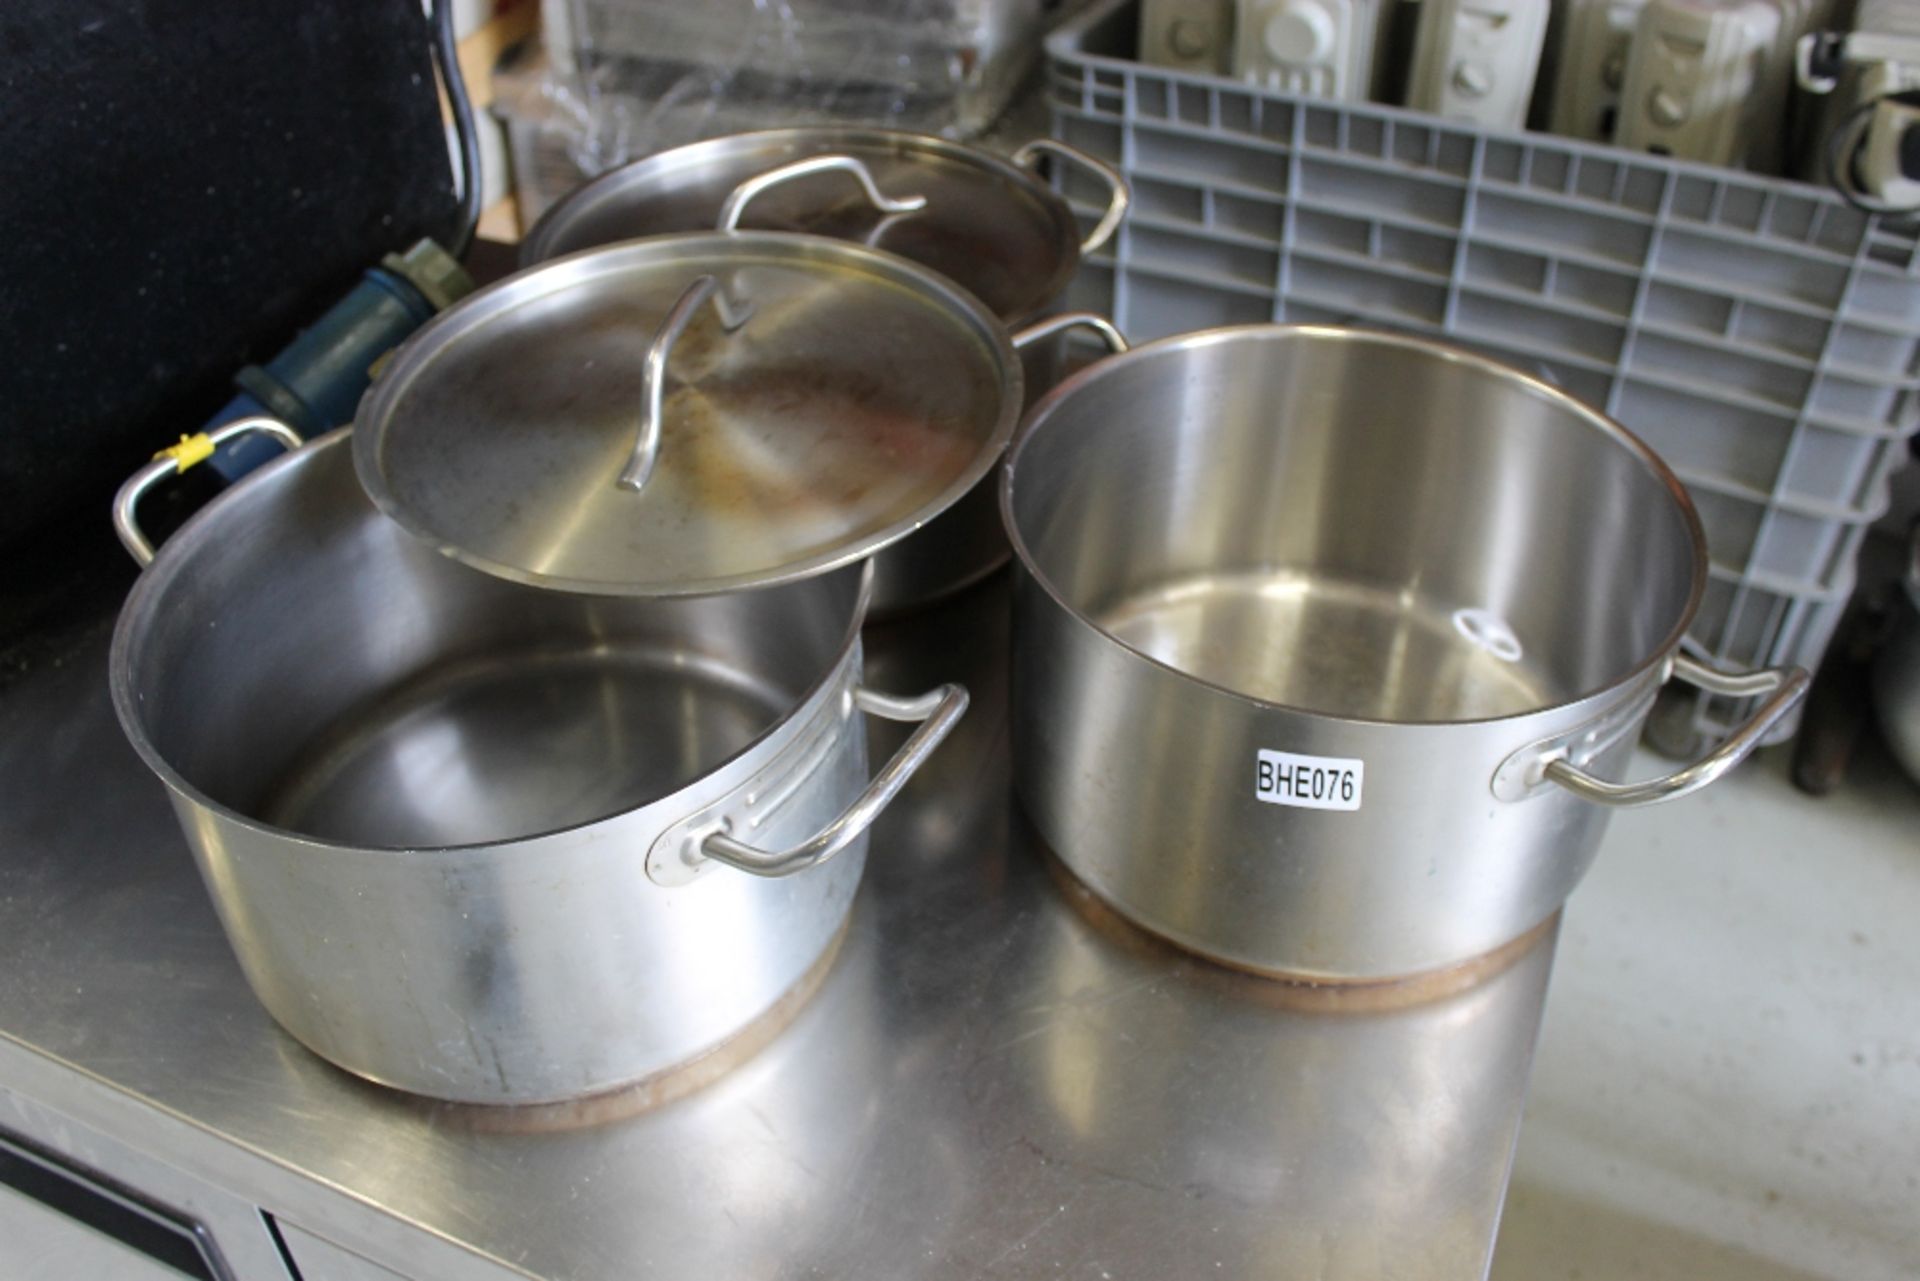 3 x Vogue Large Stainless-Steel Cooking Pots with 2 Lids - Image 2 of 2